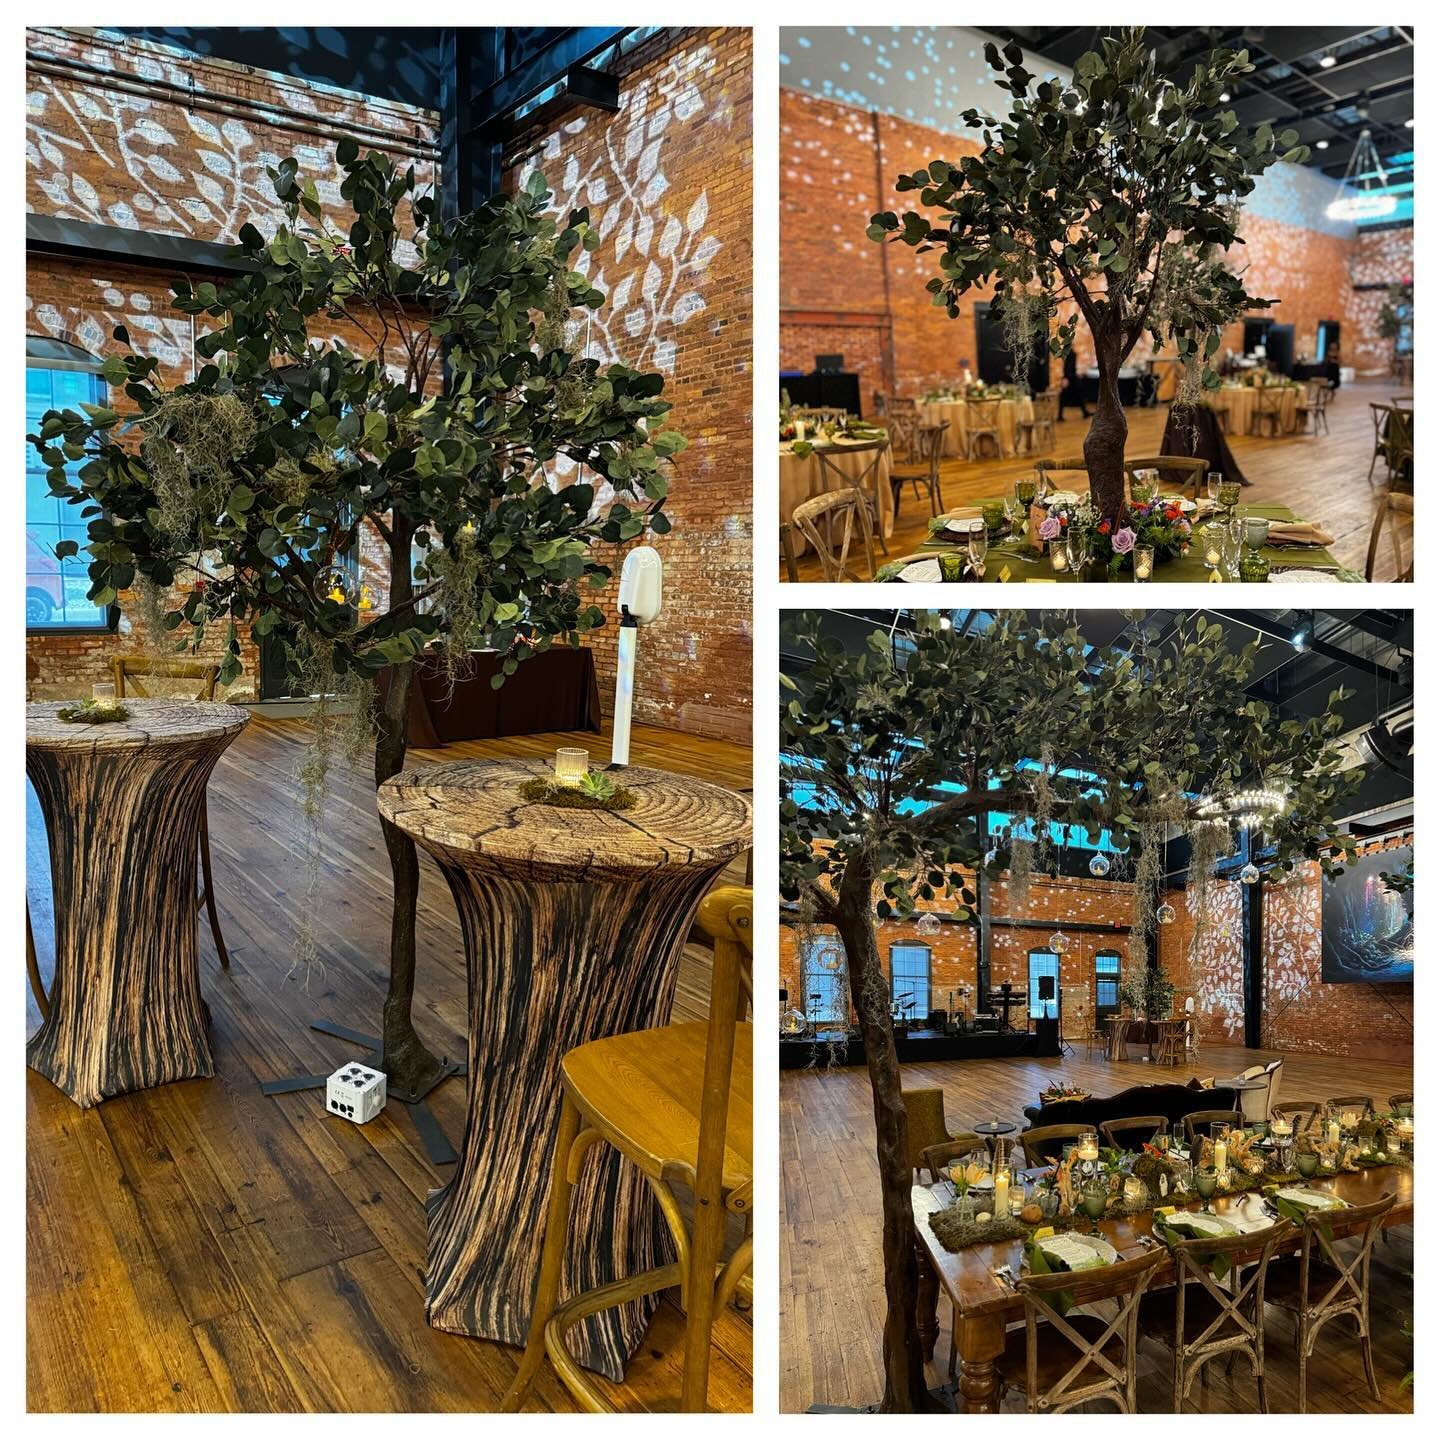 Magical wedding at Armature Works where we provided our various Eucalyptus Tree (5 ft., 8 ft., &amp; 10 ft, Arching) &amp; Wood Crossback Barstools. Pleasure working with Unique Weddings &amp; Events &amp; Events In Bloom! &mdash;&mdash;&mdash;&mdash